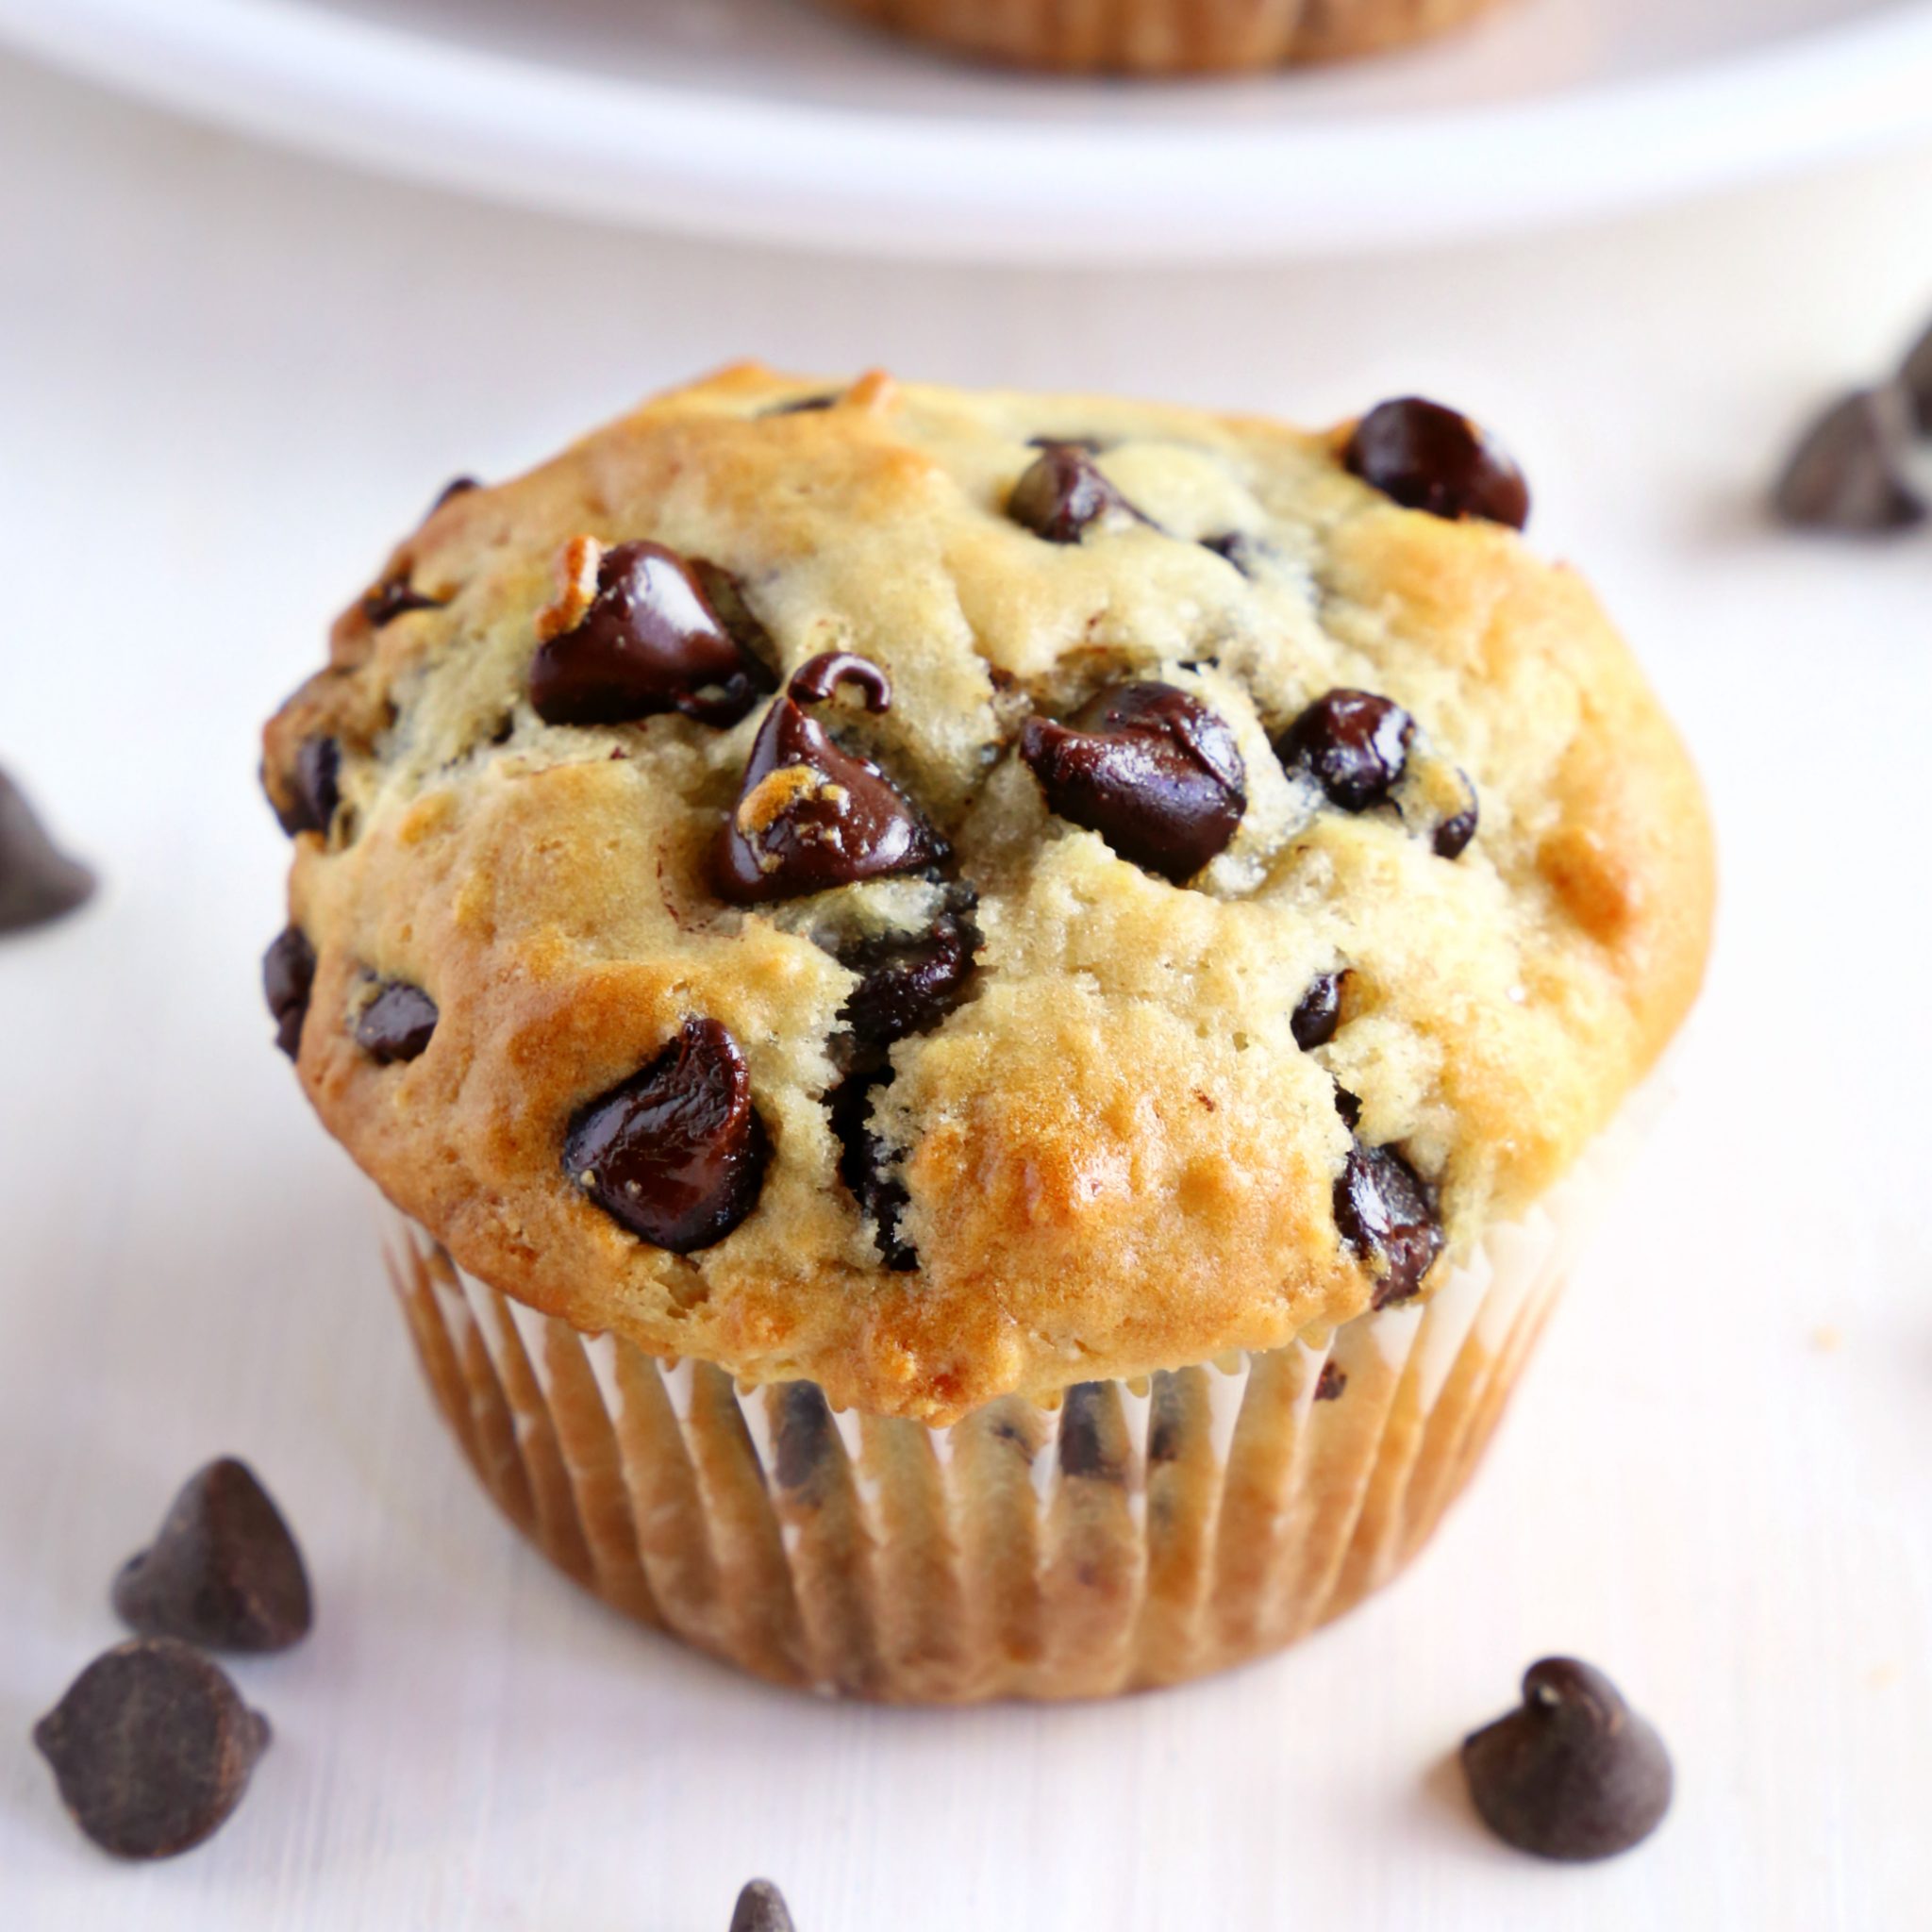 Greek Yogurt Muffins with Chocolate Chips - The Busy Baker